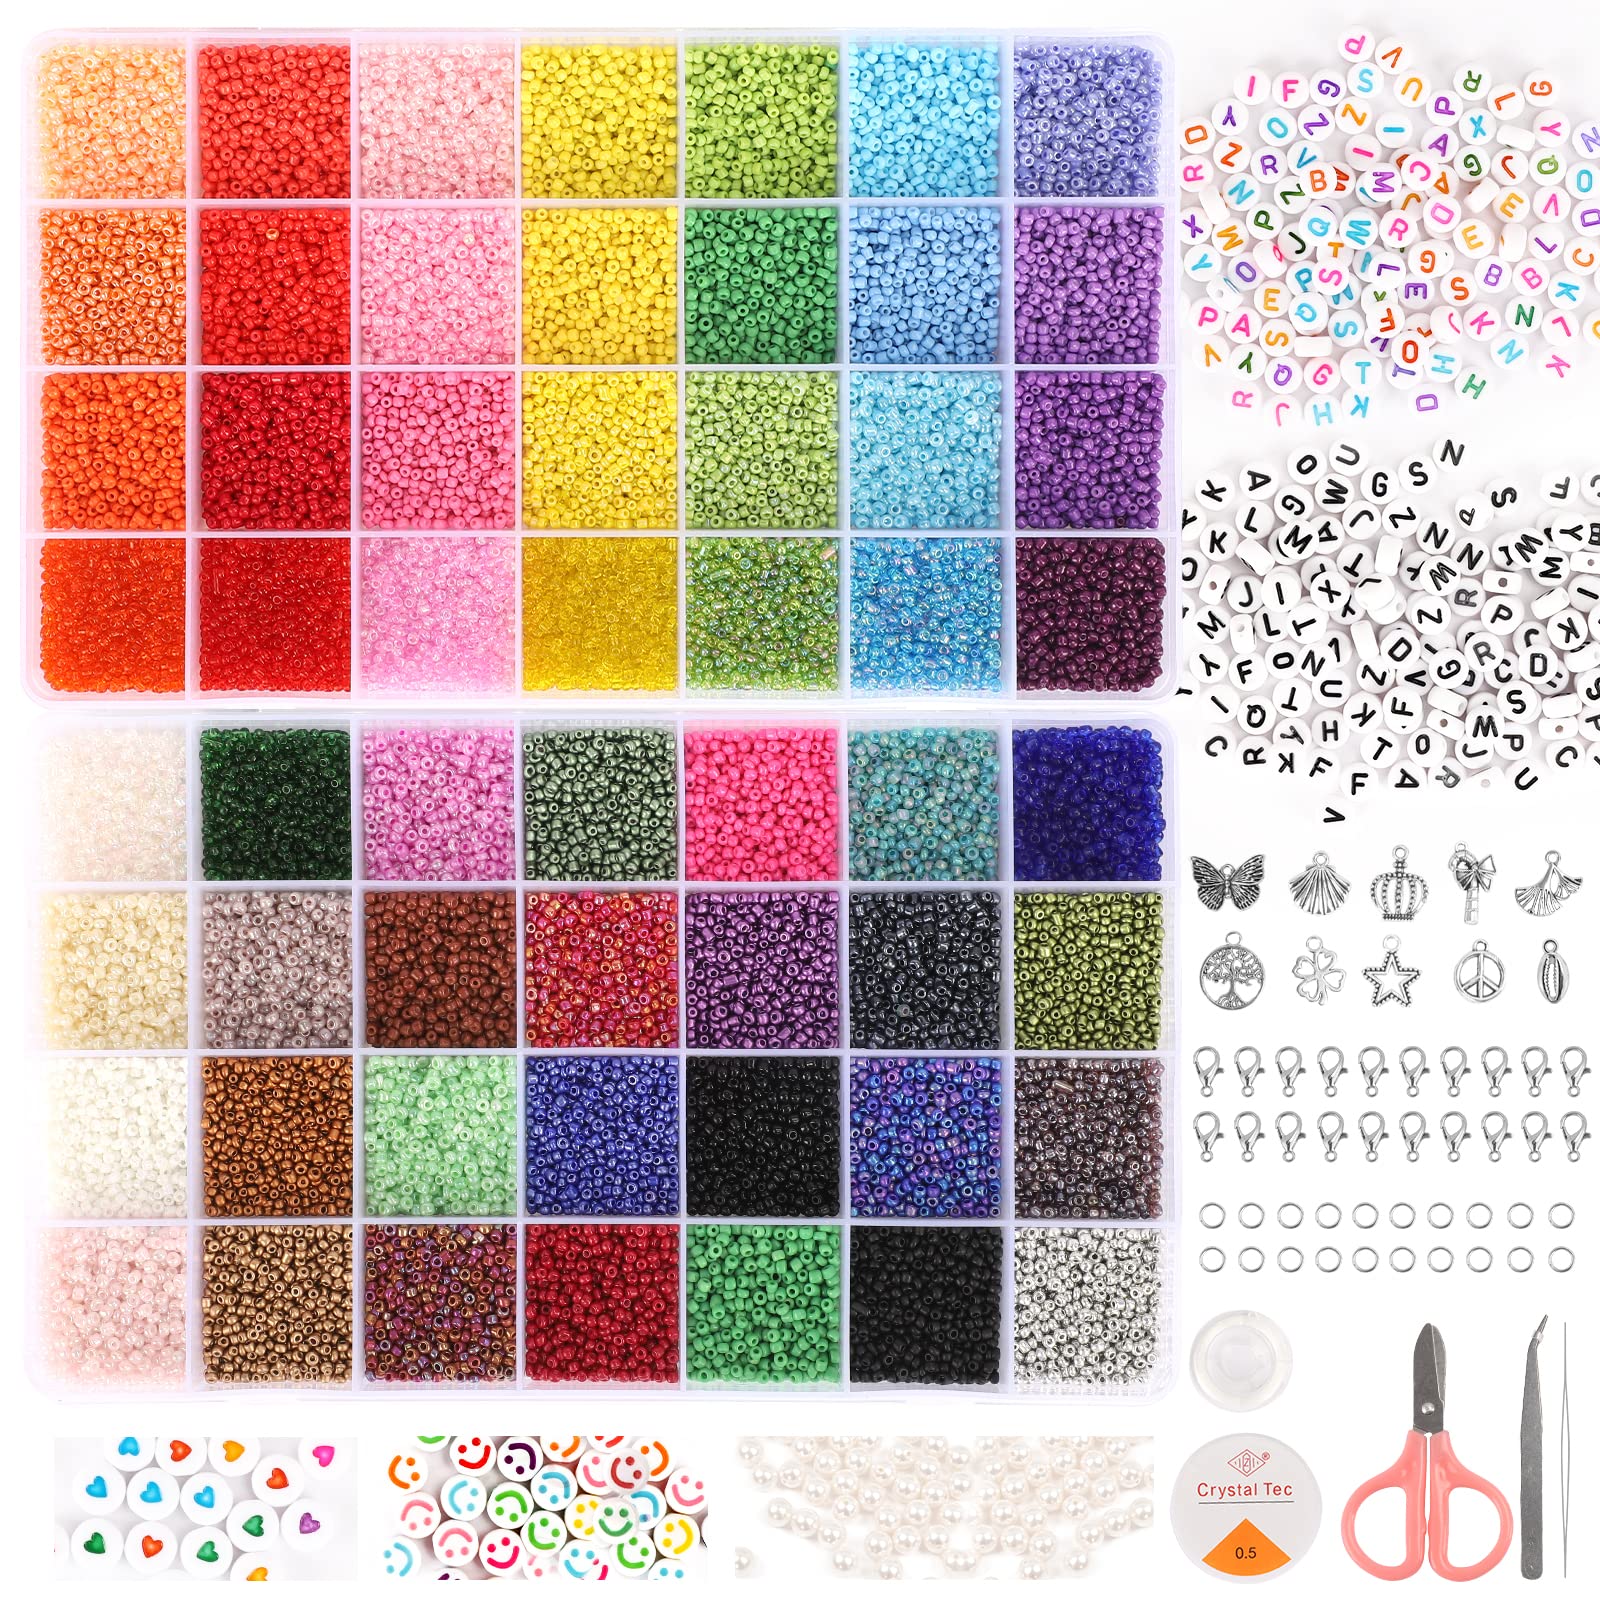 QUEFE 19200pcs 2mm Glass Seed Beads for Jewelry Nepal